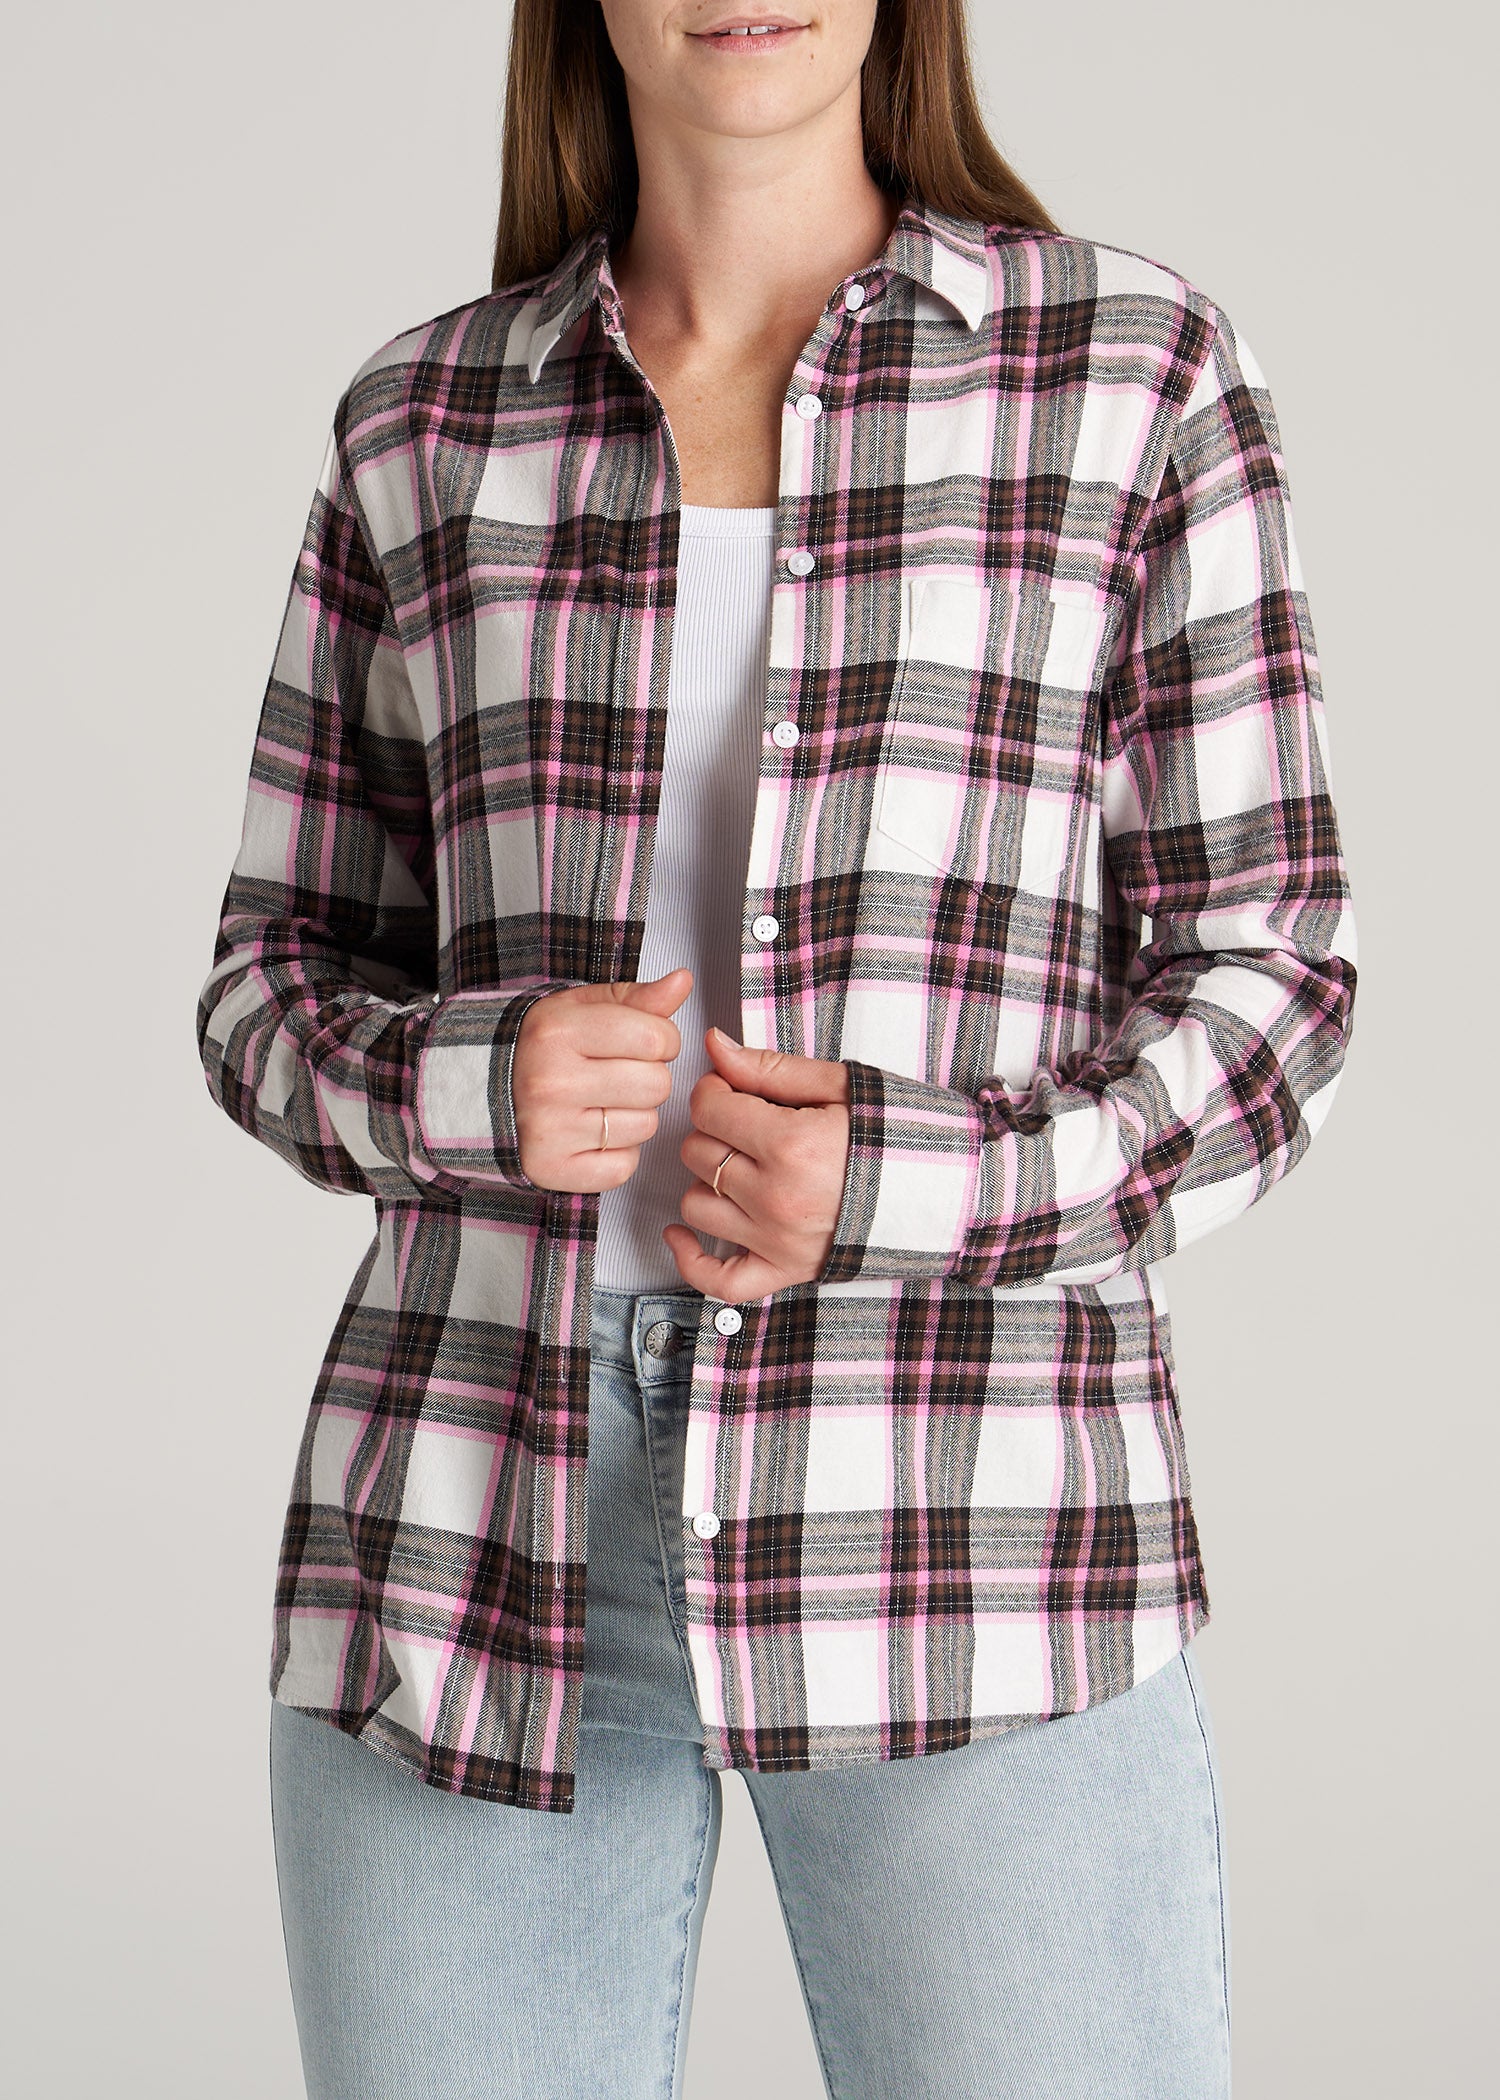 Where to Buy The Best Womens' Plaid Shirts & How To Wear